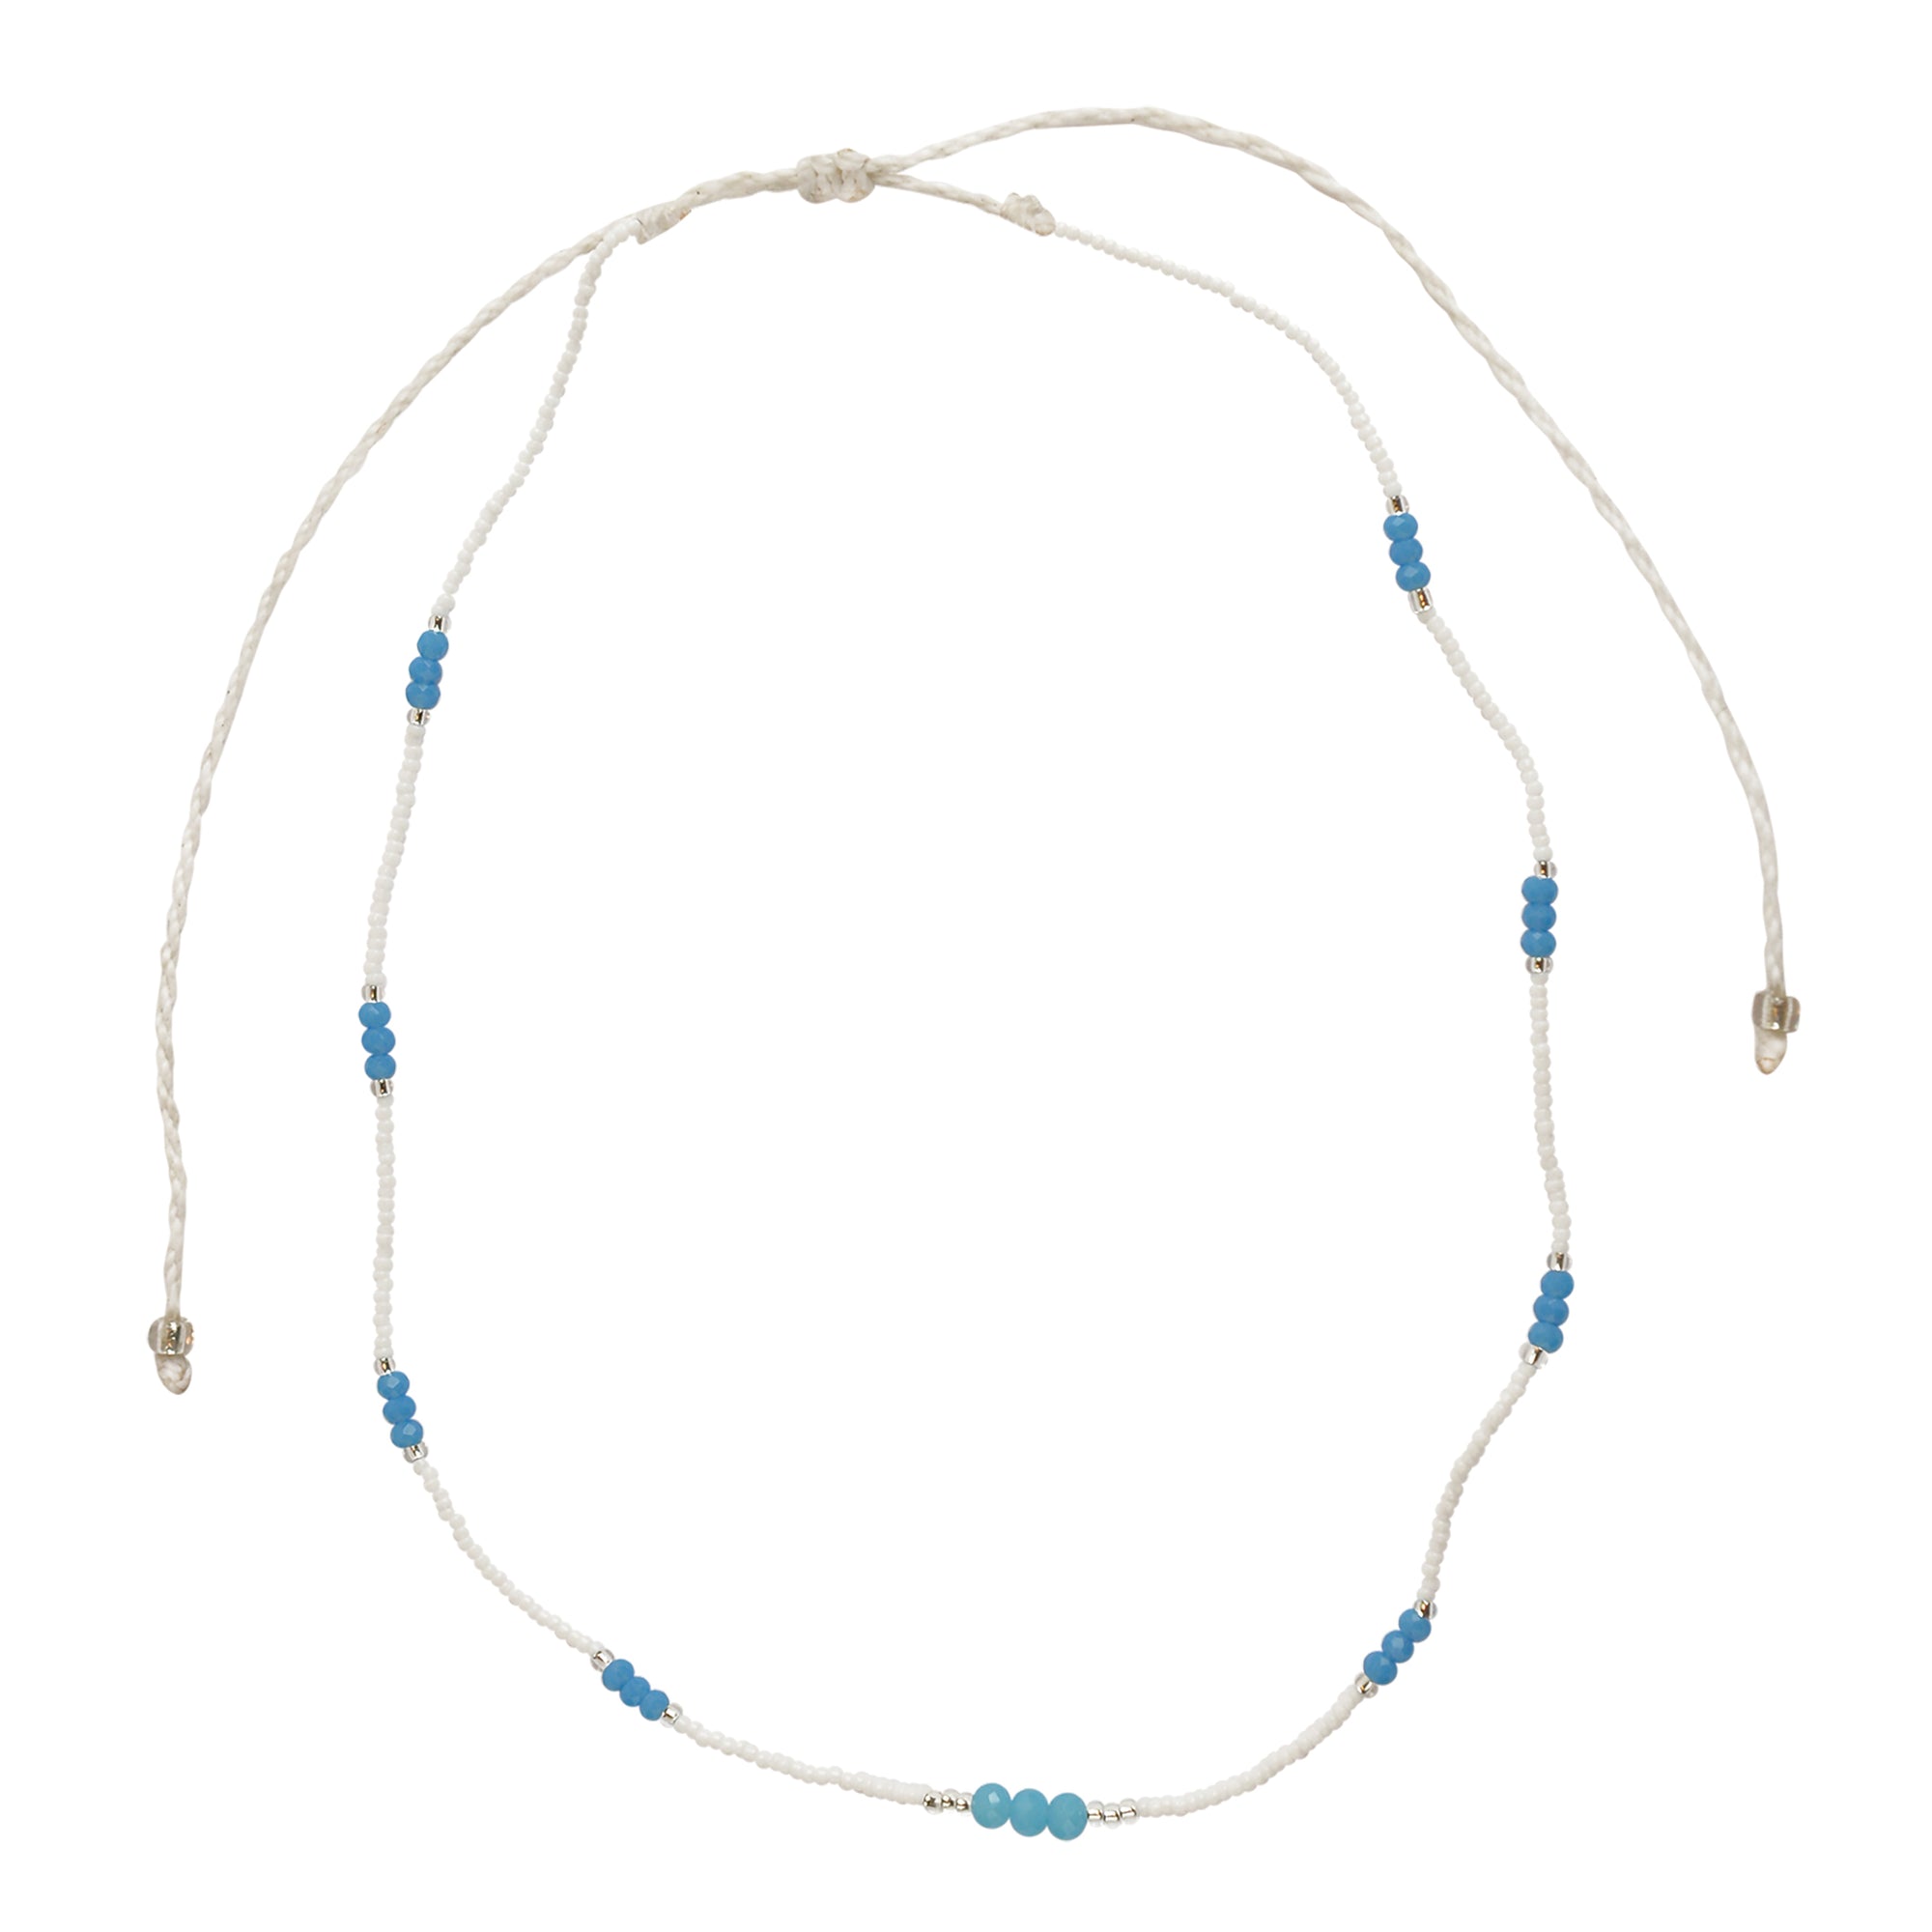 Seed Bead & Faceted Bead Wax Cord Necklace - Viva life Jewellery